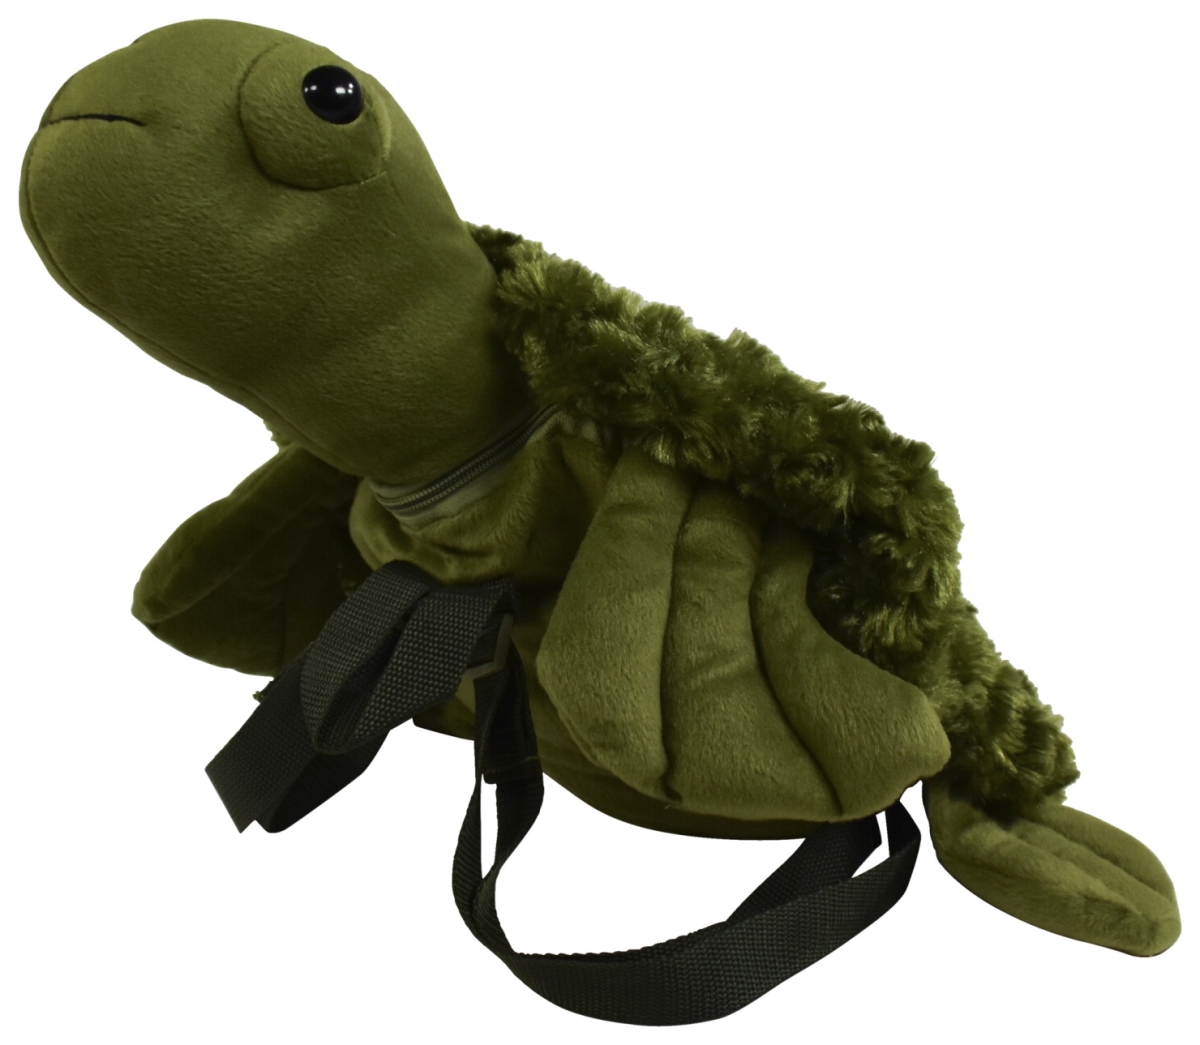 2005623 3 Lbs Weighted Plush Turtle Backpack, Green